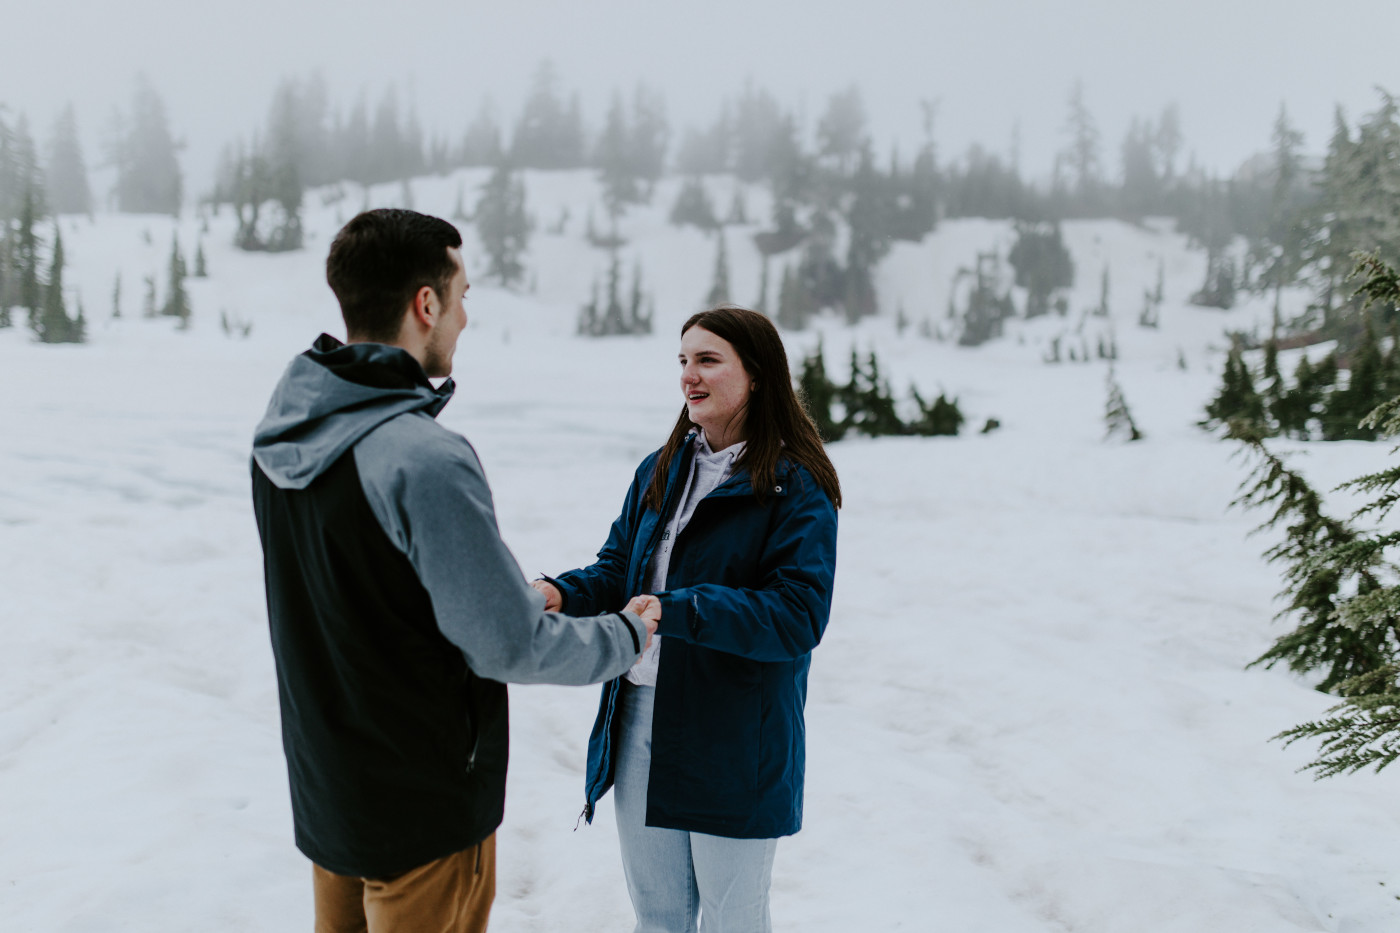 Taylor smiles at Kyle. Elopement photography at North Cascades National Park by Sienna Plus Josh.